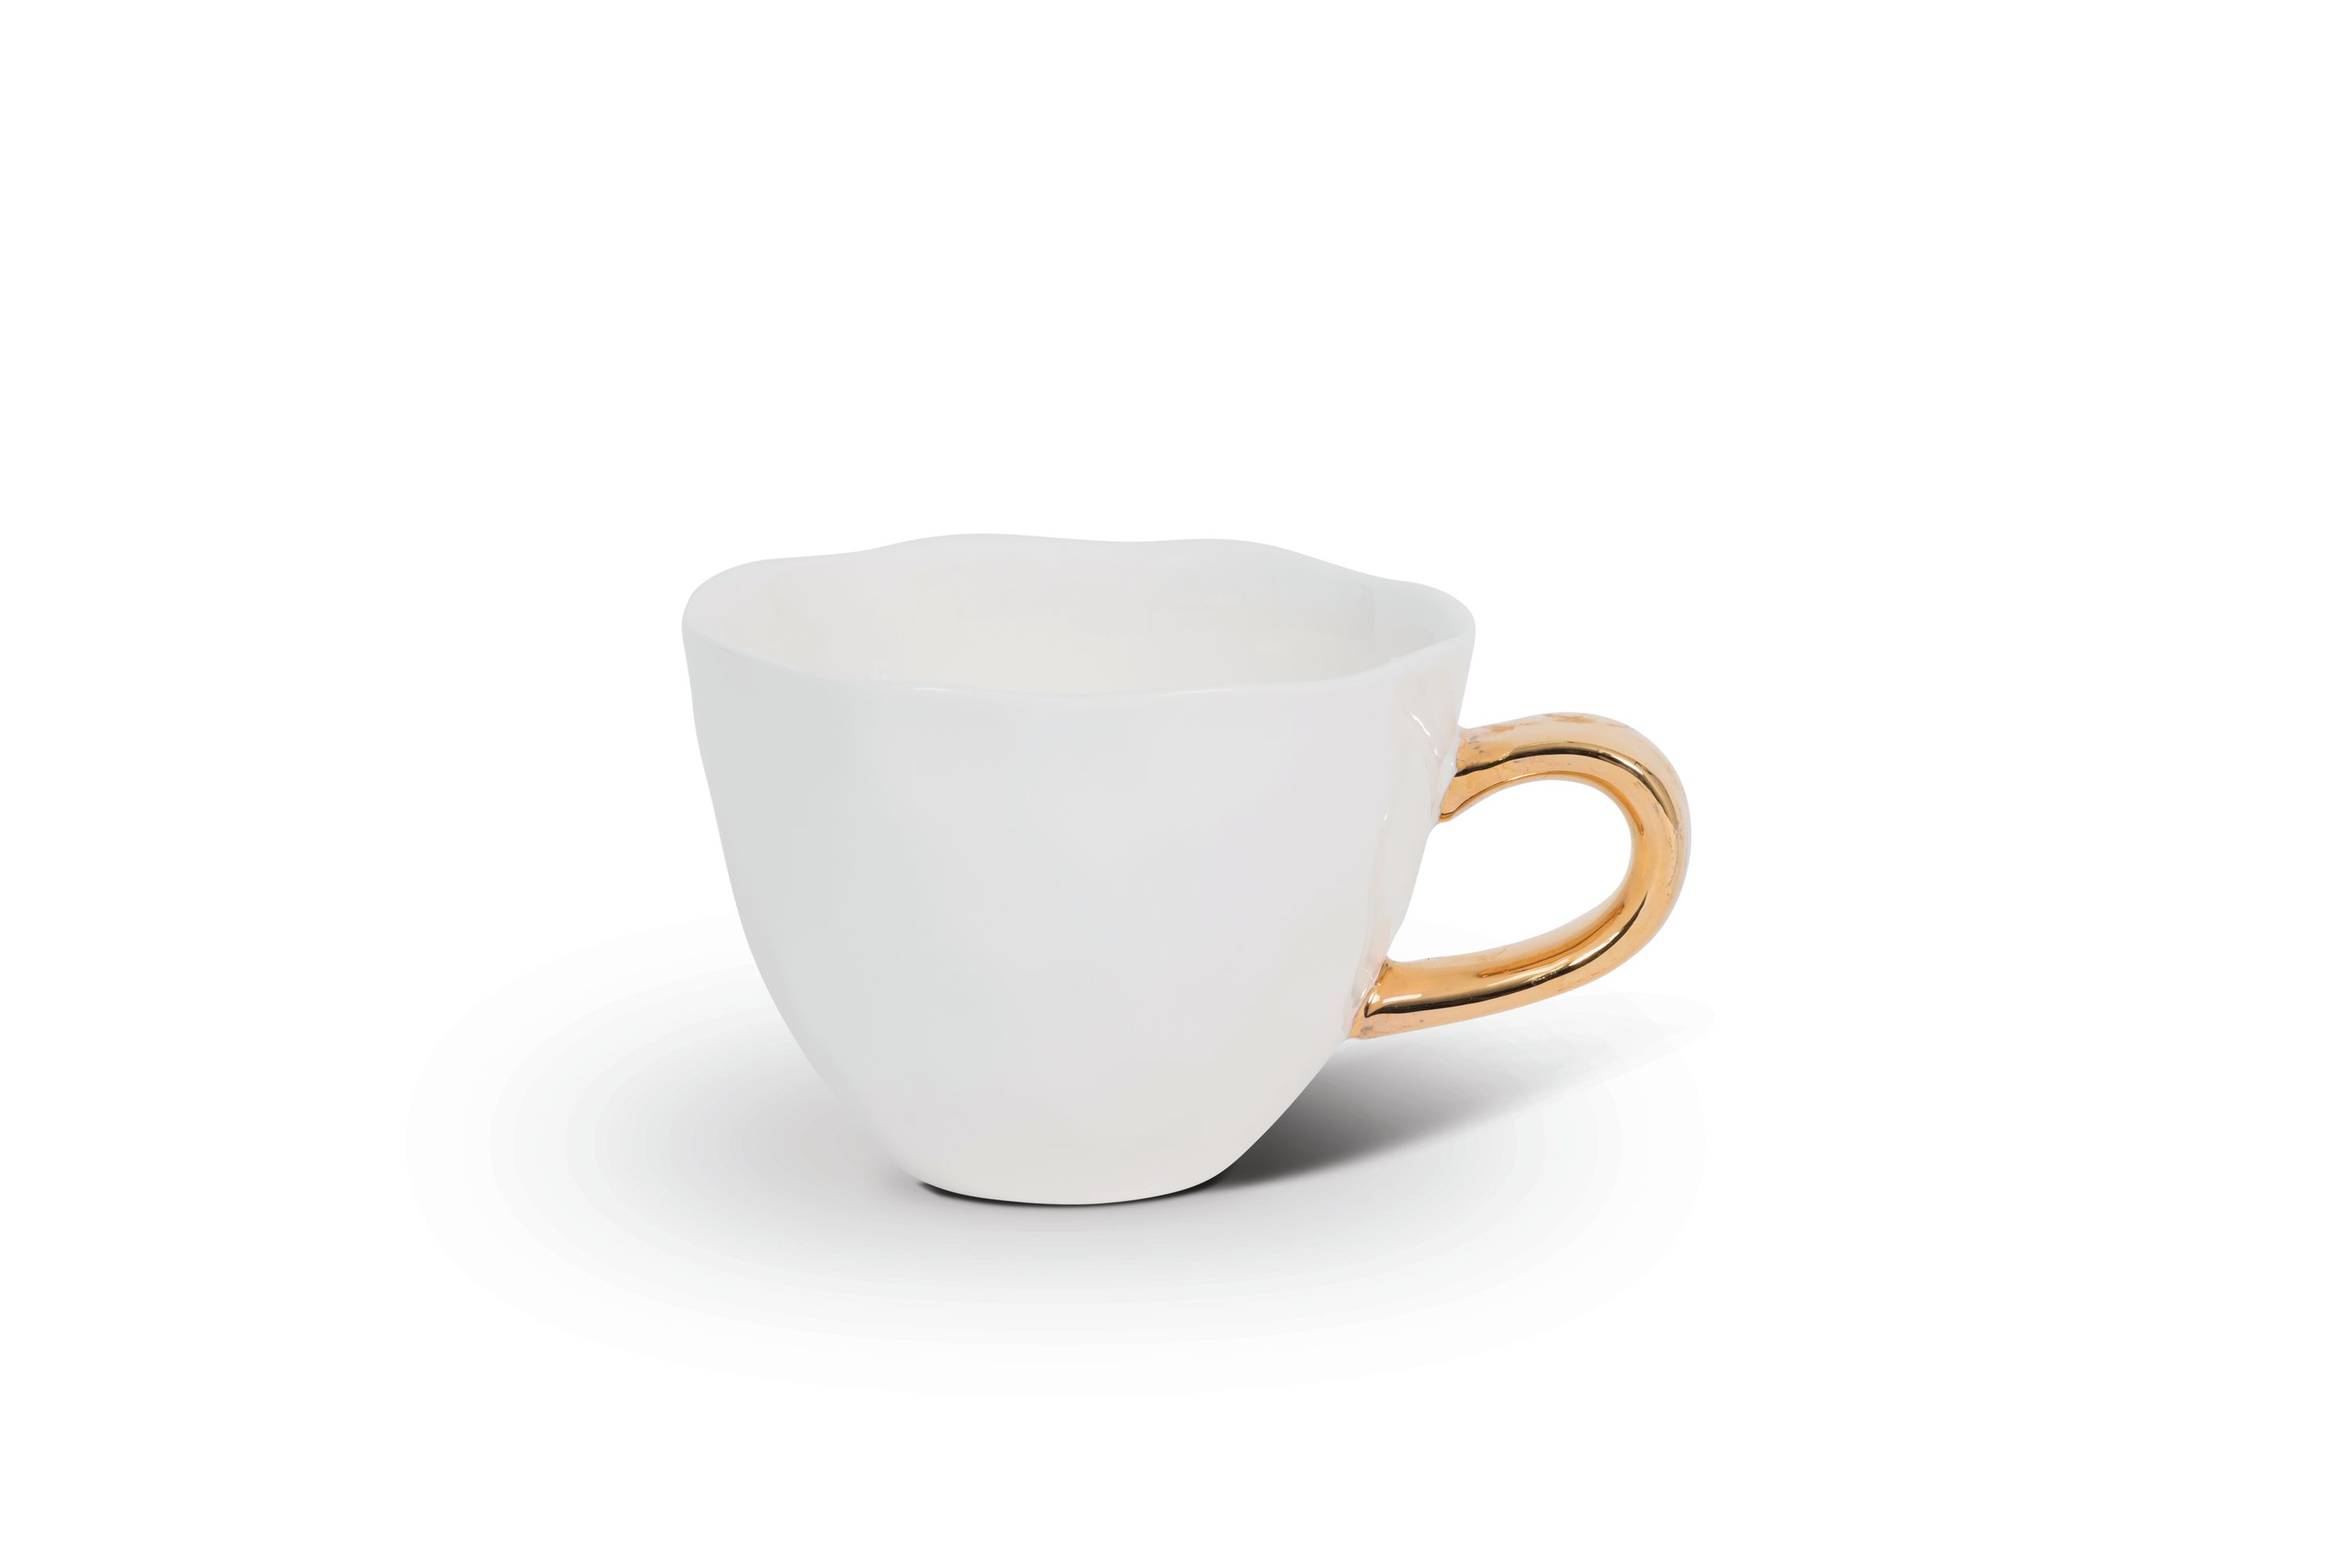 Unc Good Morning Cup Cappuccino/tea White Gift